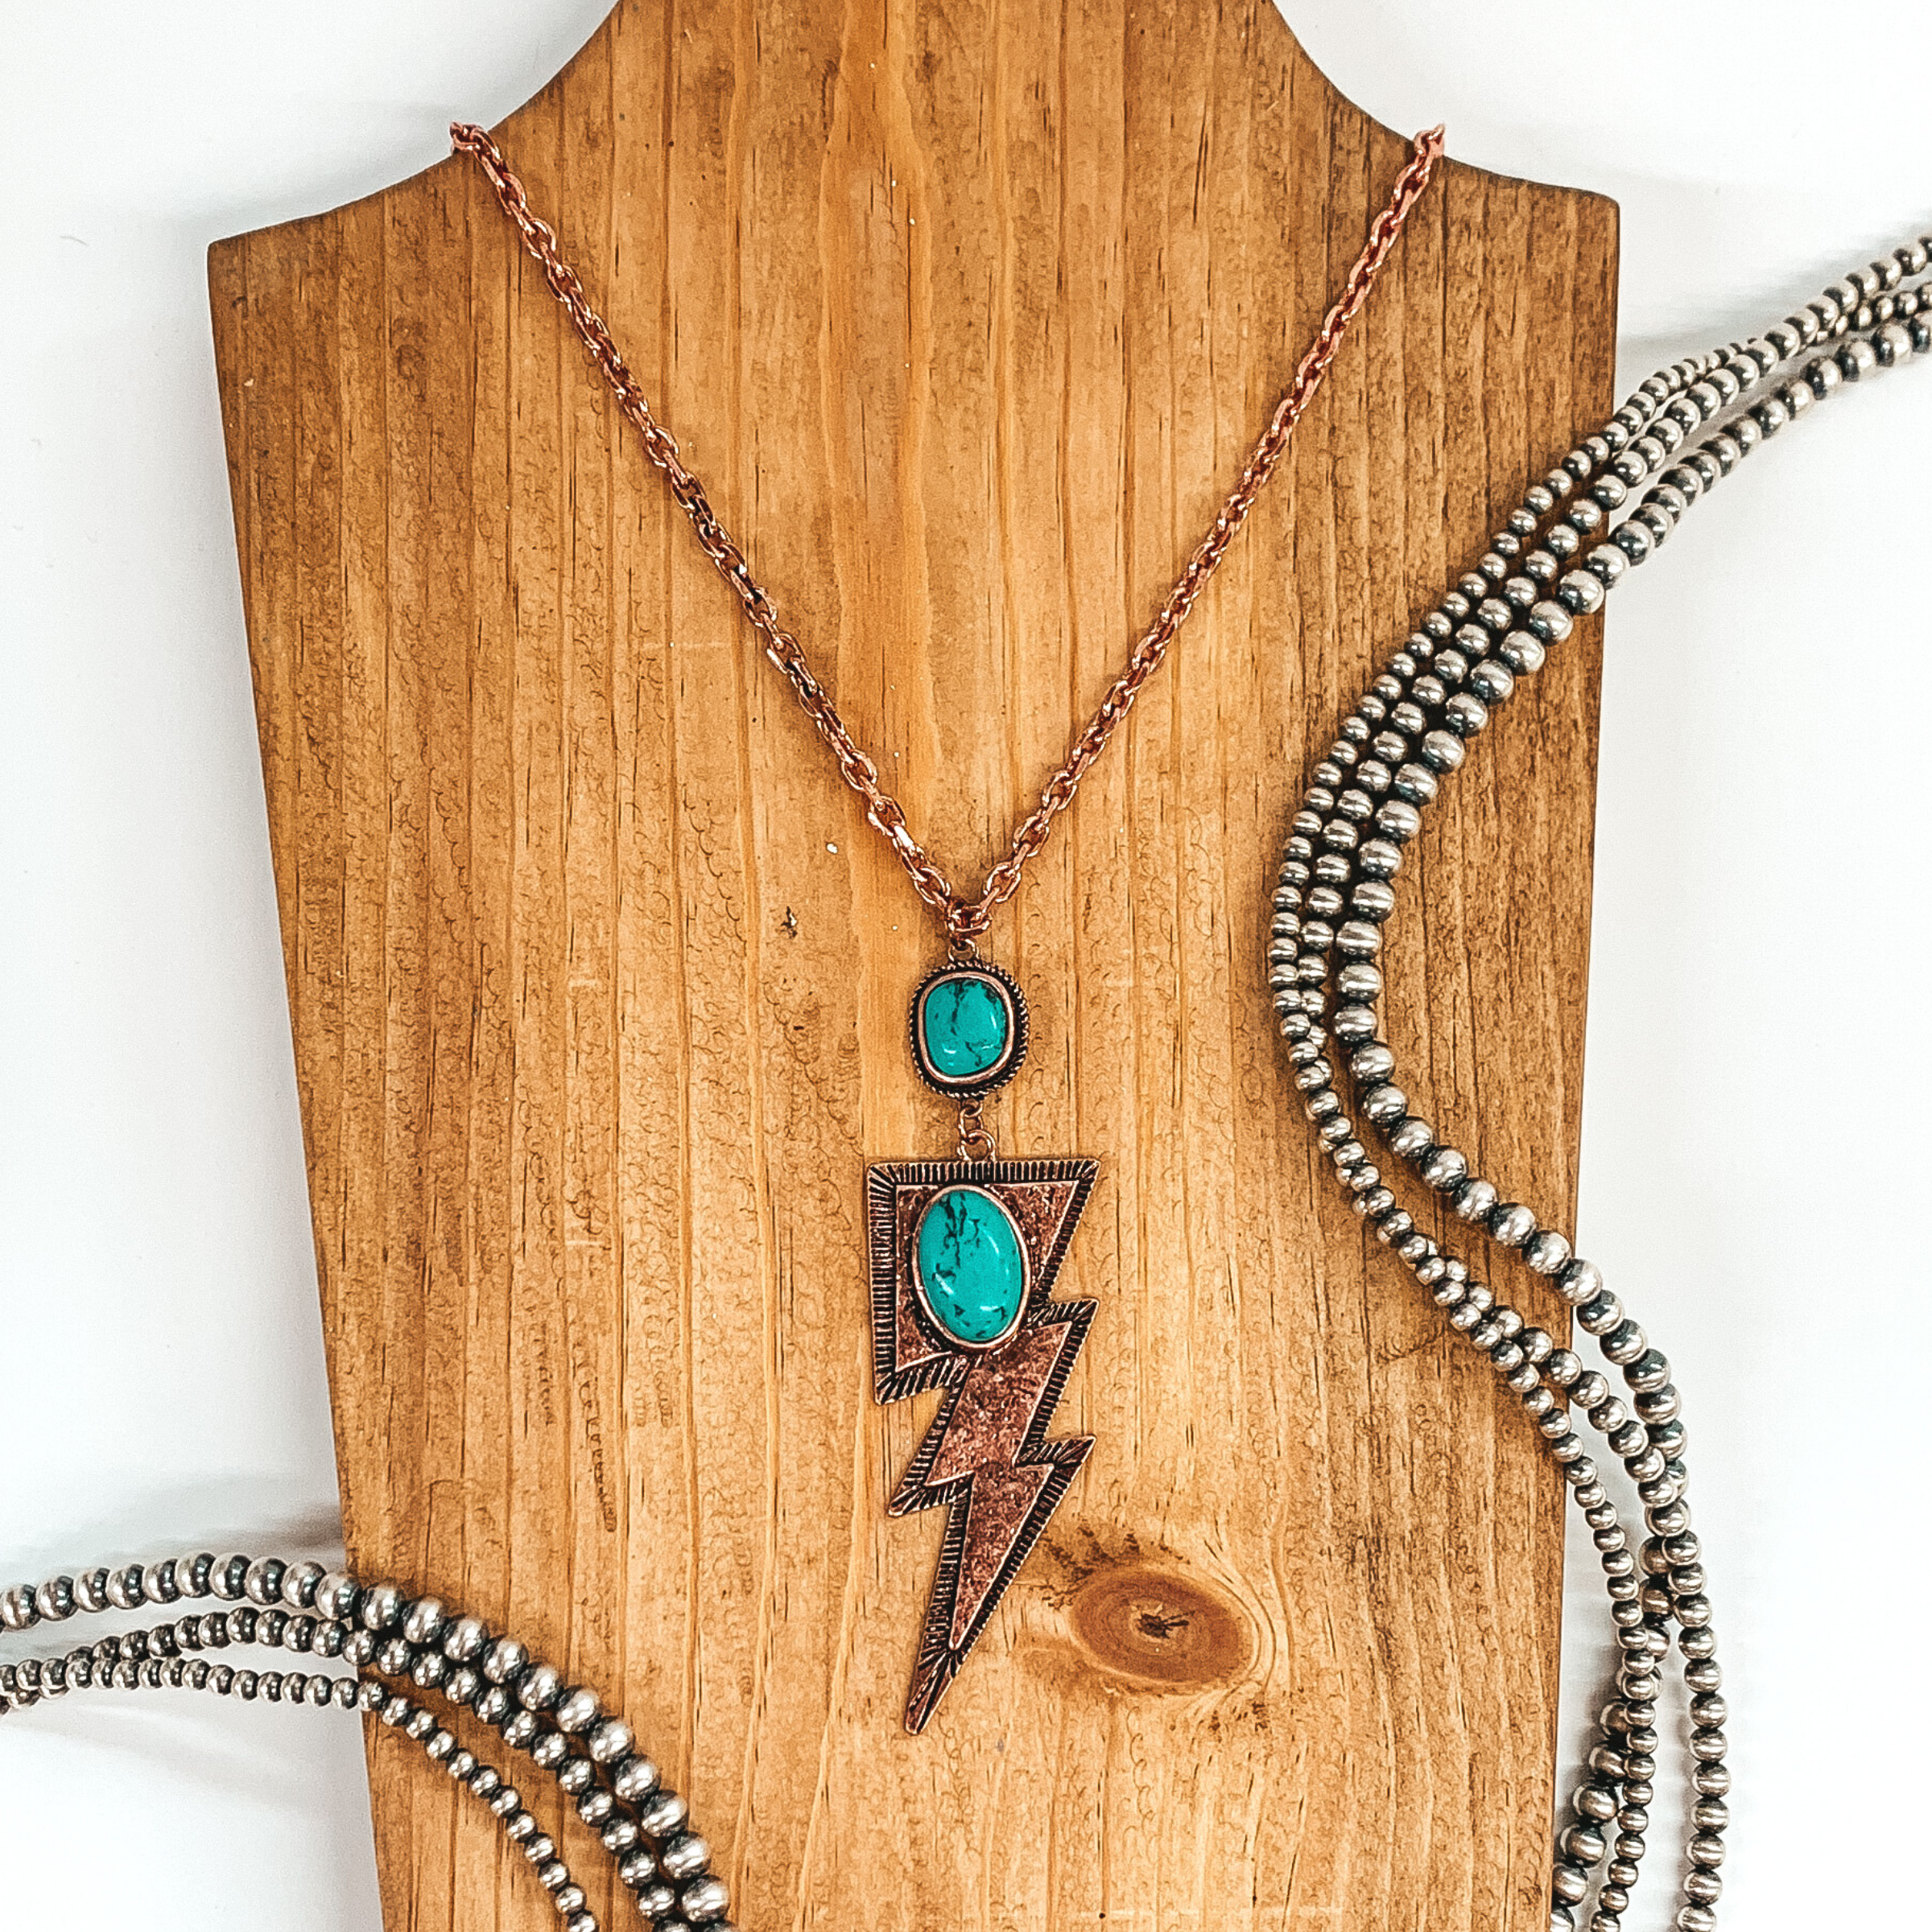 Copper chained necklace with hanging square pendant with turquoise stone and hanging copper lightning bolt pendant with oval turquoise colored stone. This necklace is pictured laying on a tan necklace holder on a white background. This picture includes silver beads as decoration. 